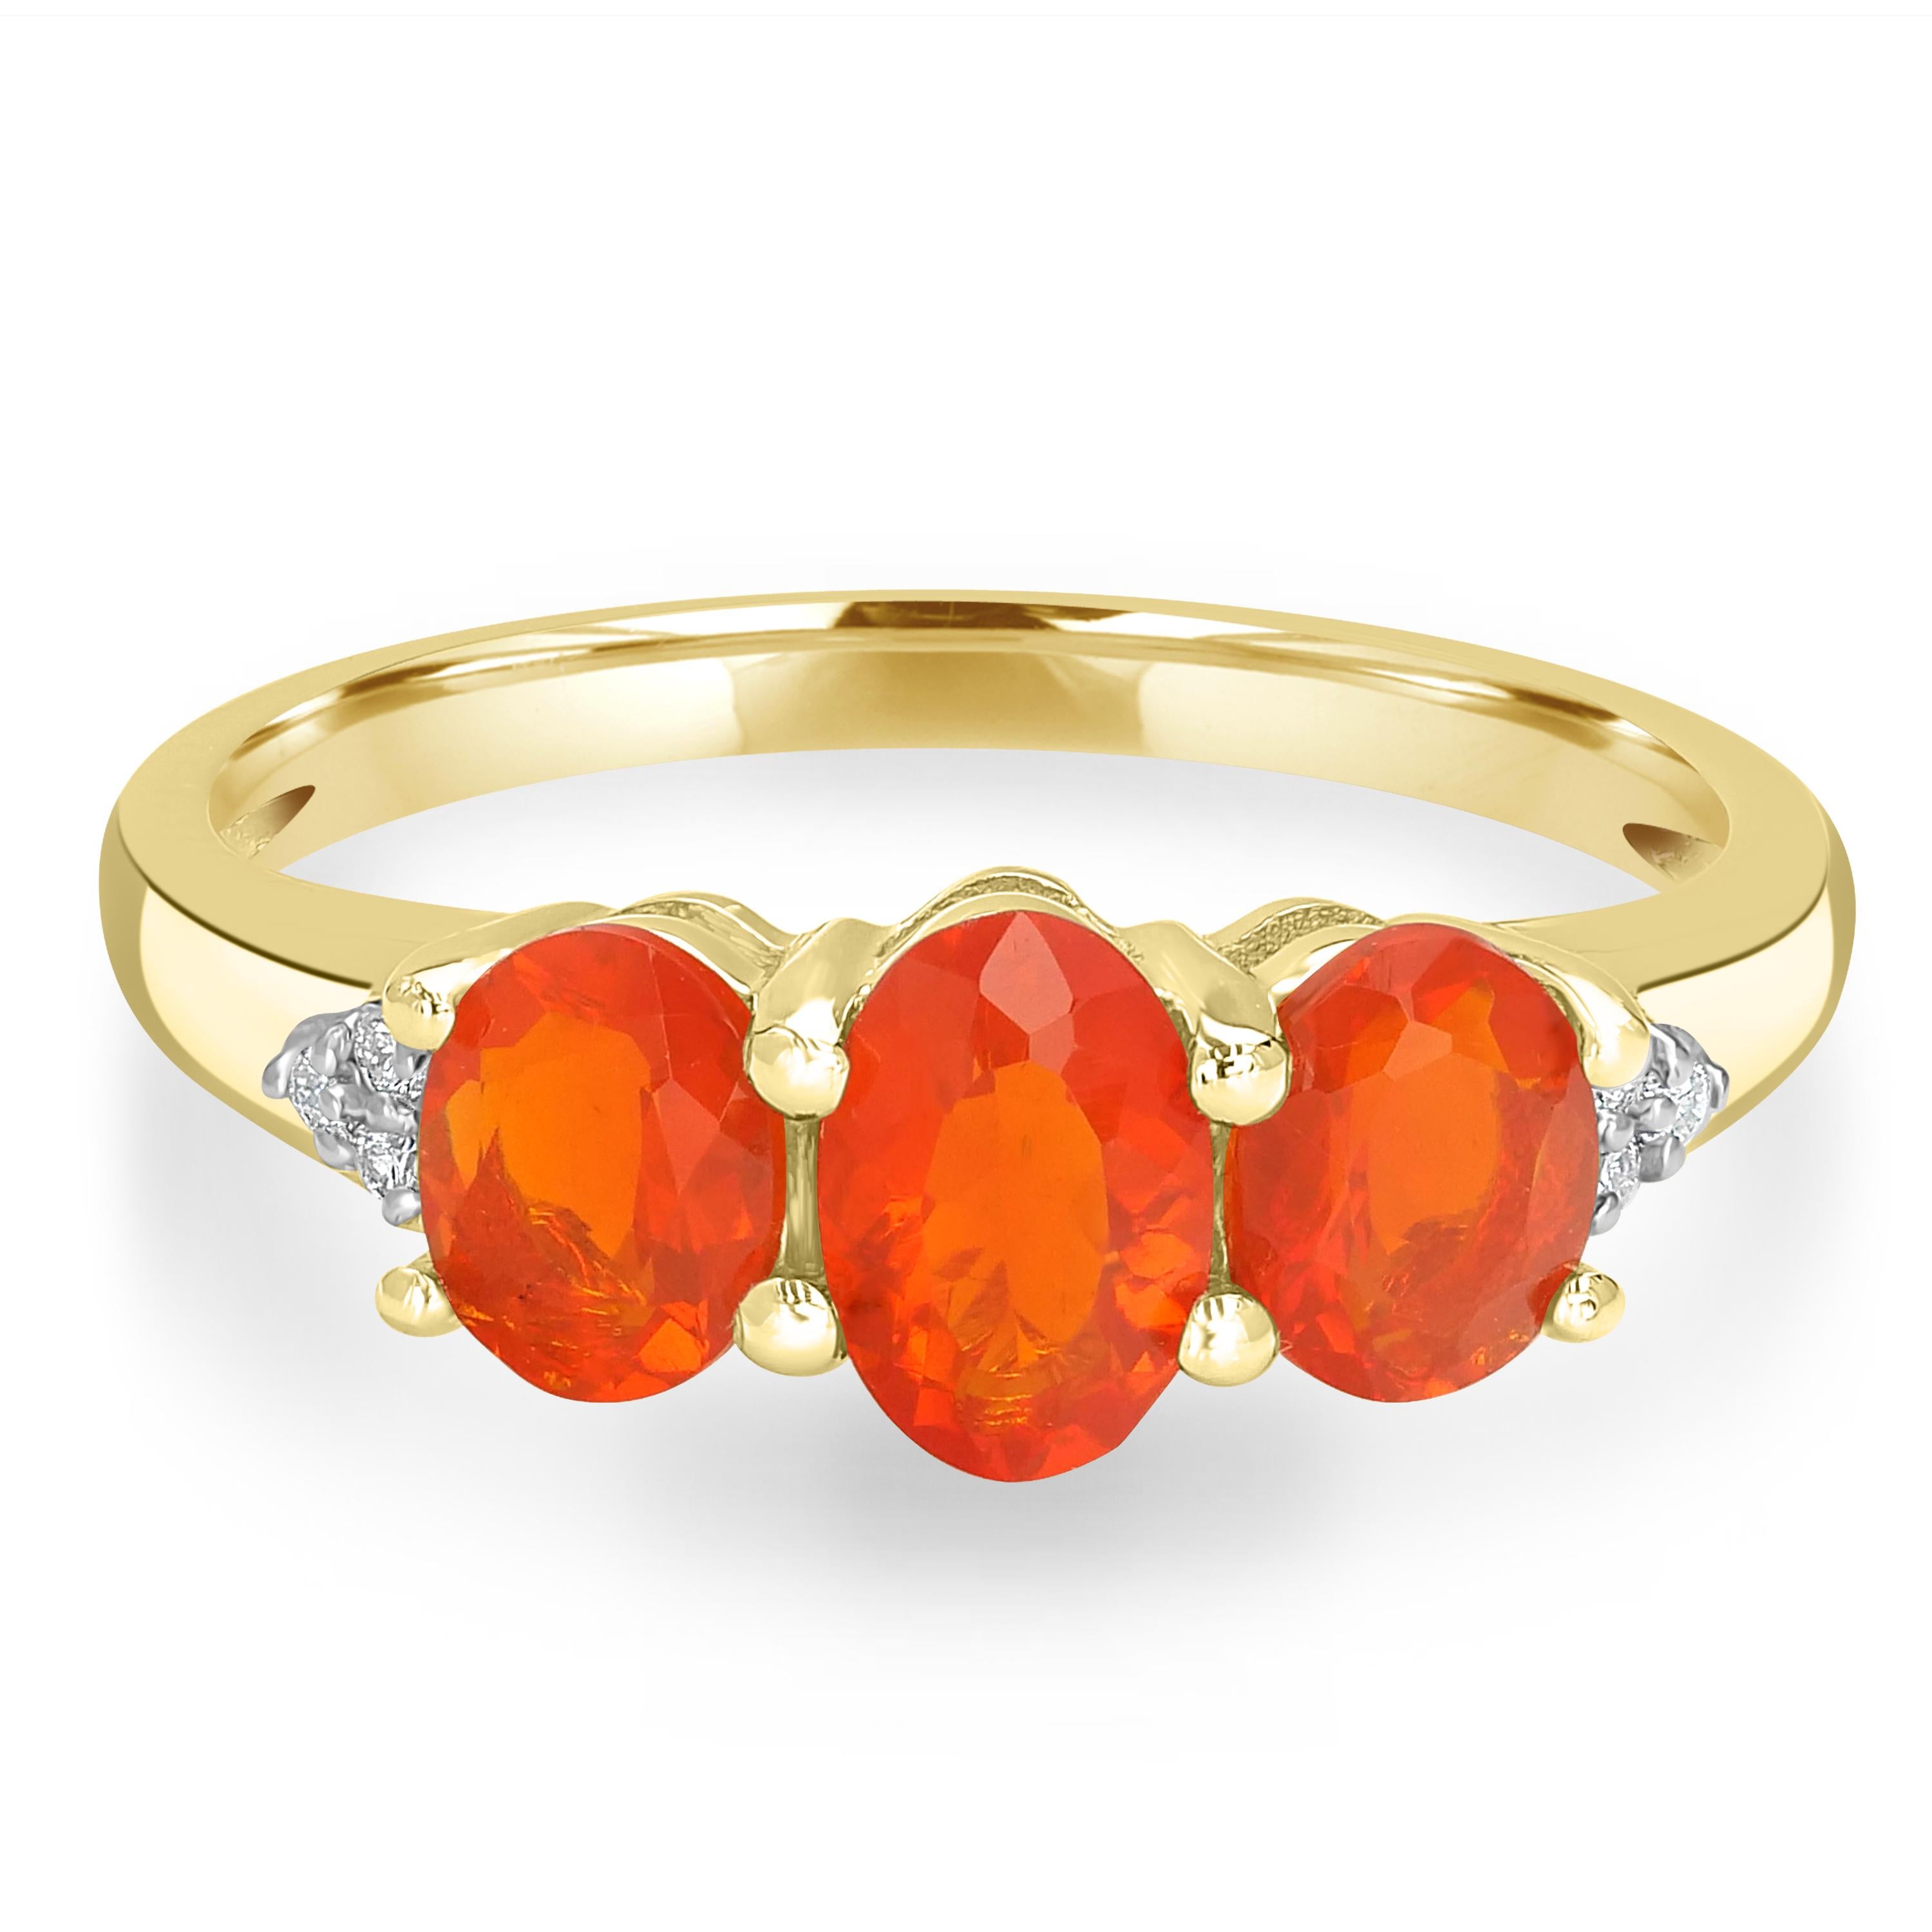 Gemistry 0.74 Ct. T.W Fire Opal & Diamond Accent Three Stone Ring in 14K Gold 2